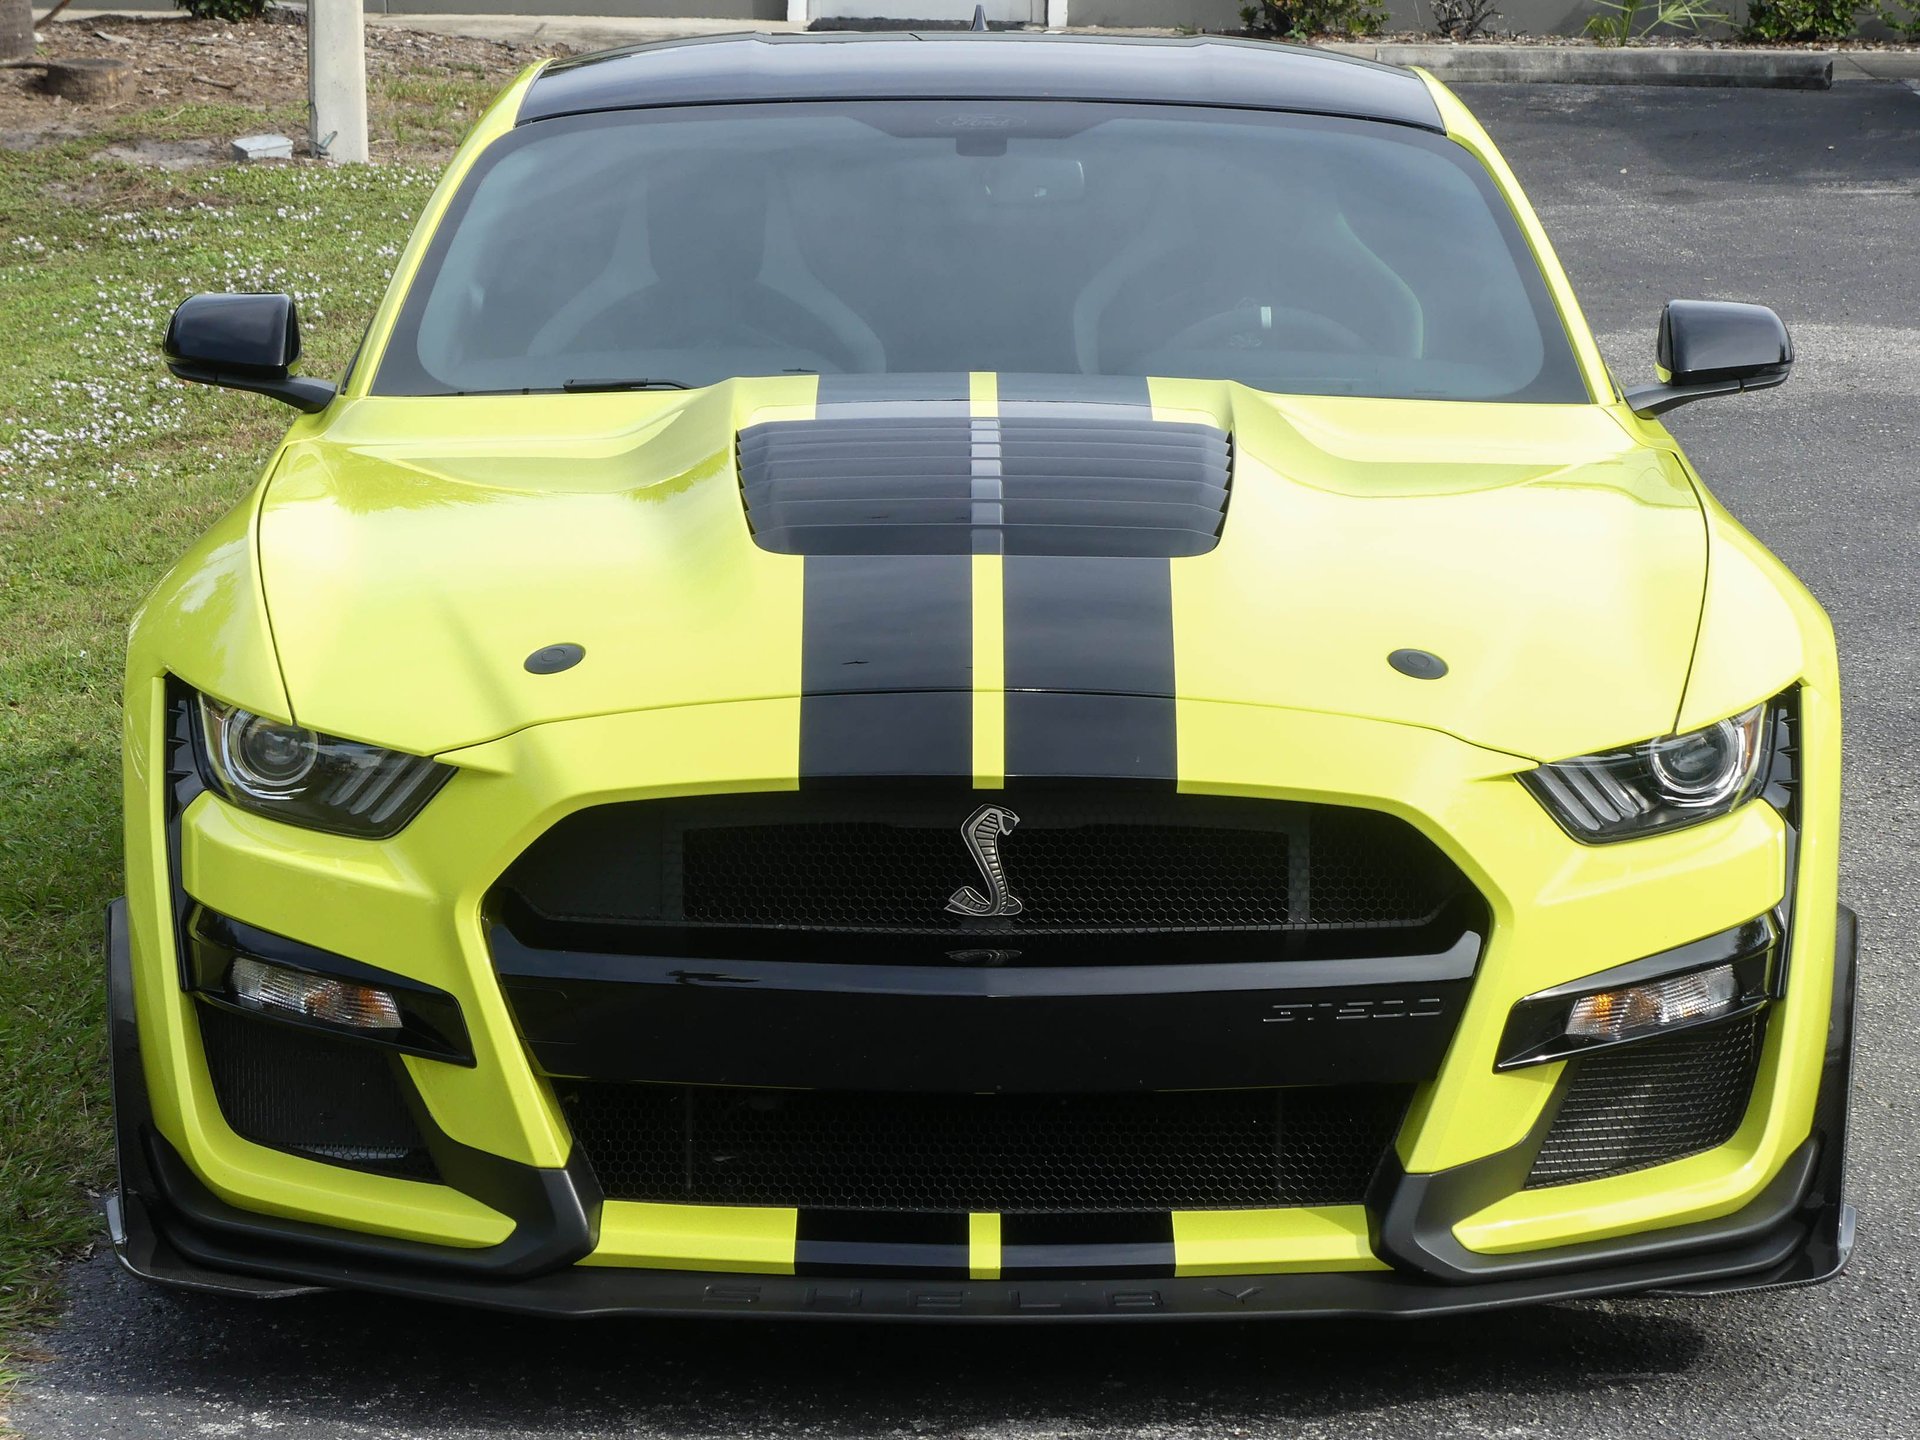 0700-TAMPA | 2021 Ford Mustang Shelby GT500 Carbon Fiber Track Pack | Survivor Classic Cars Services